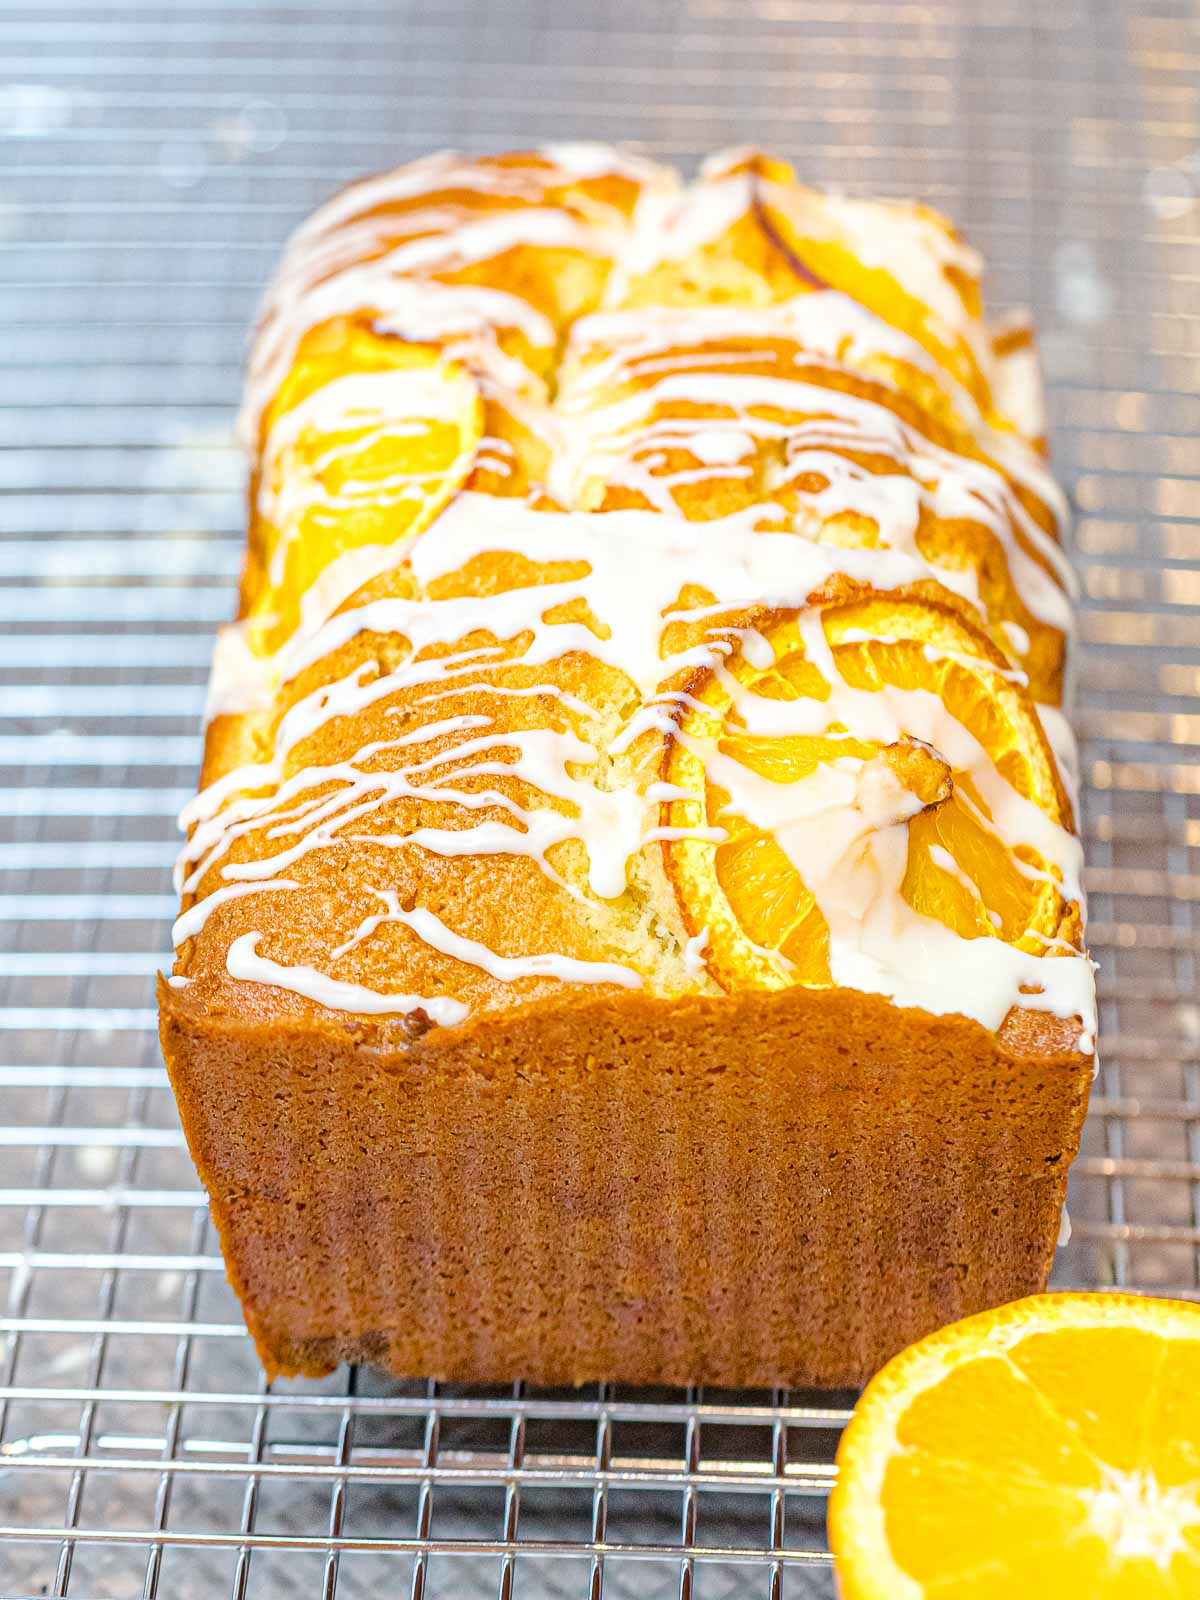 loaf of orange pound cake with a glazed icing drizzle topped with orange slices on a wire cooking rack